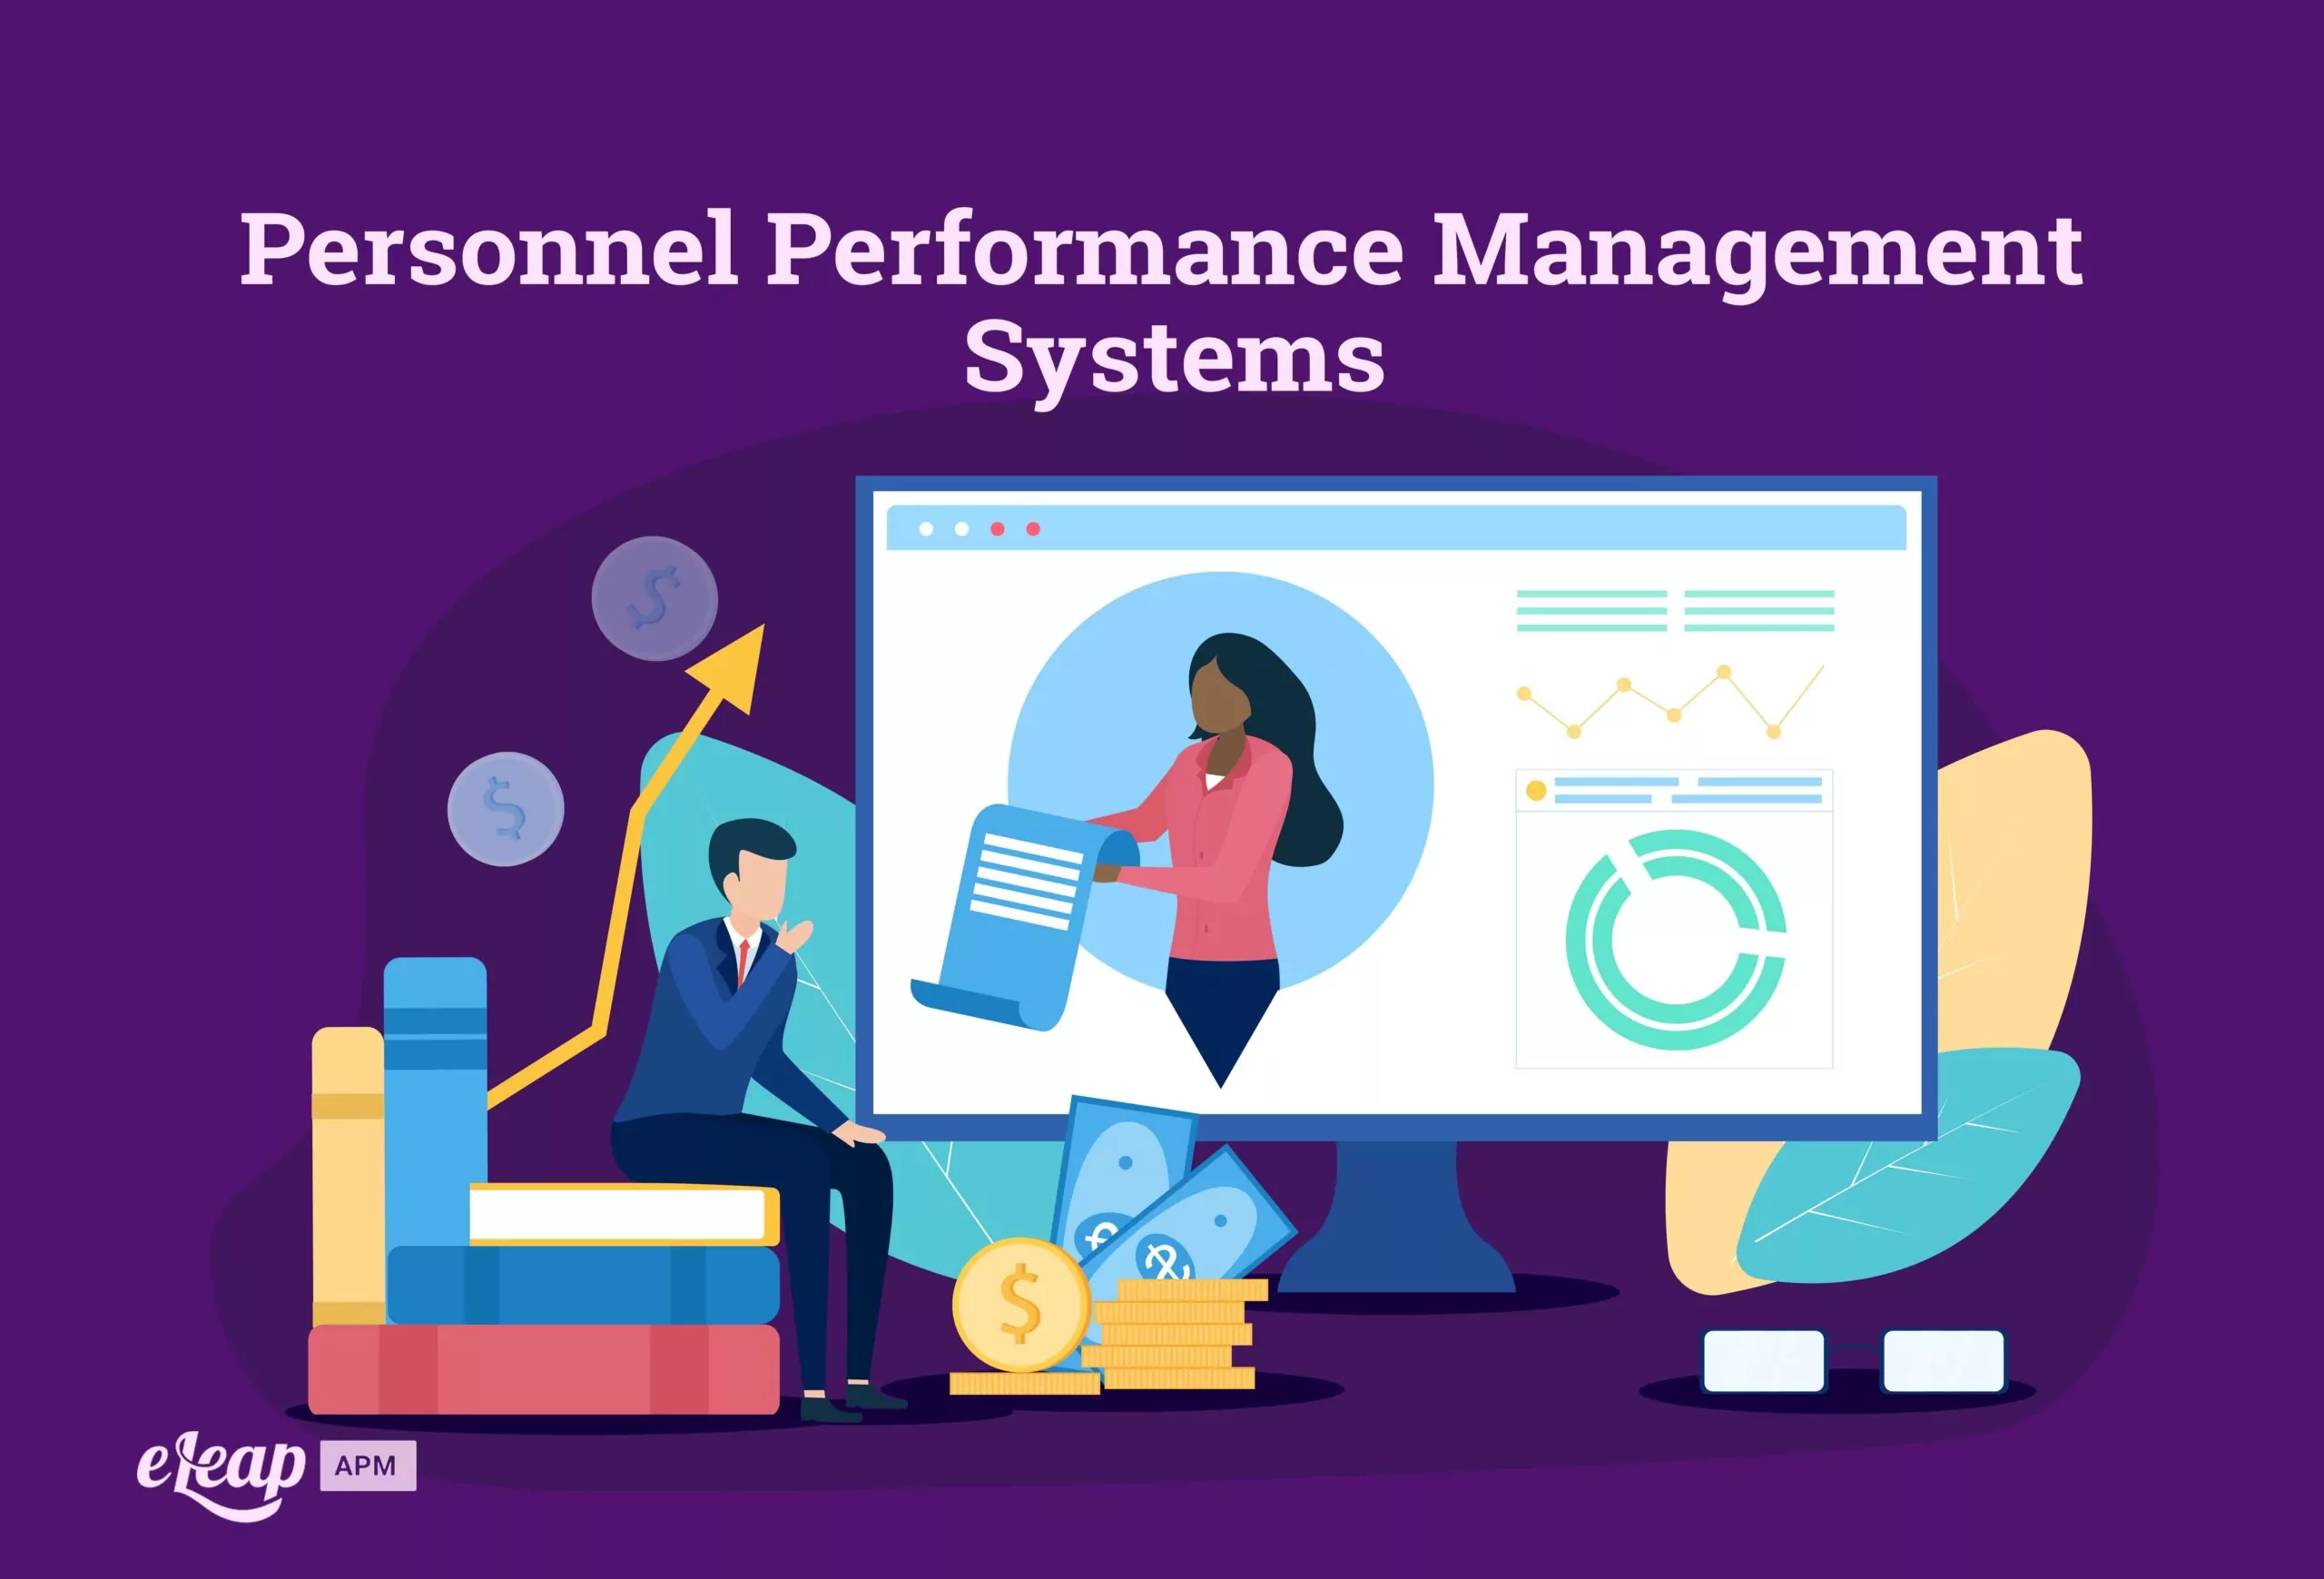 Personnel Performance Management Systems